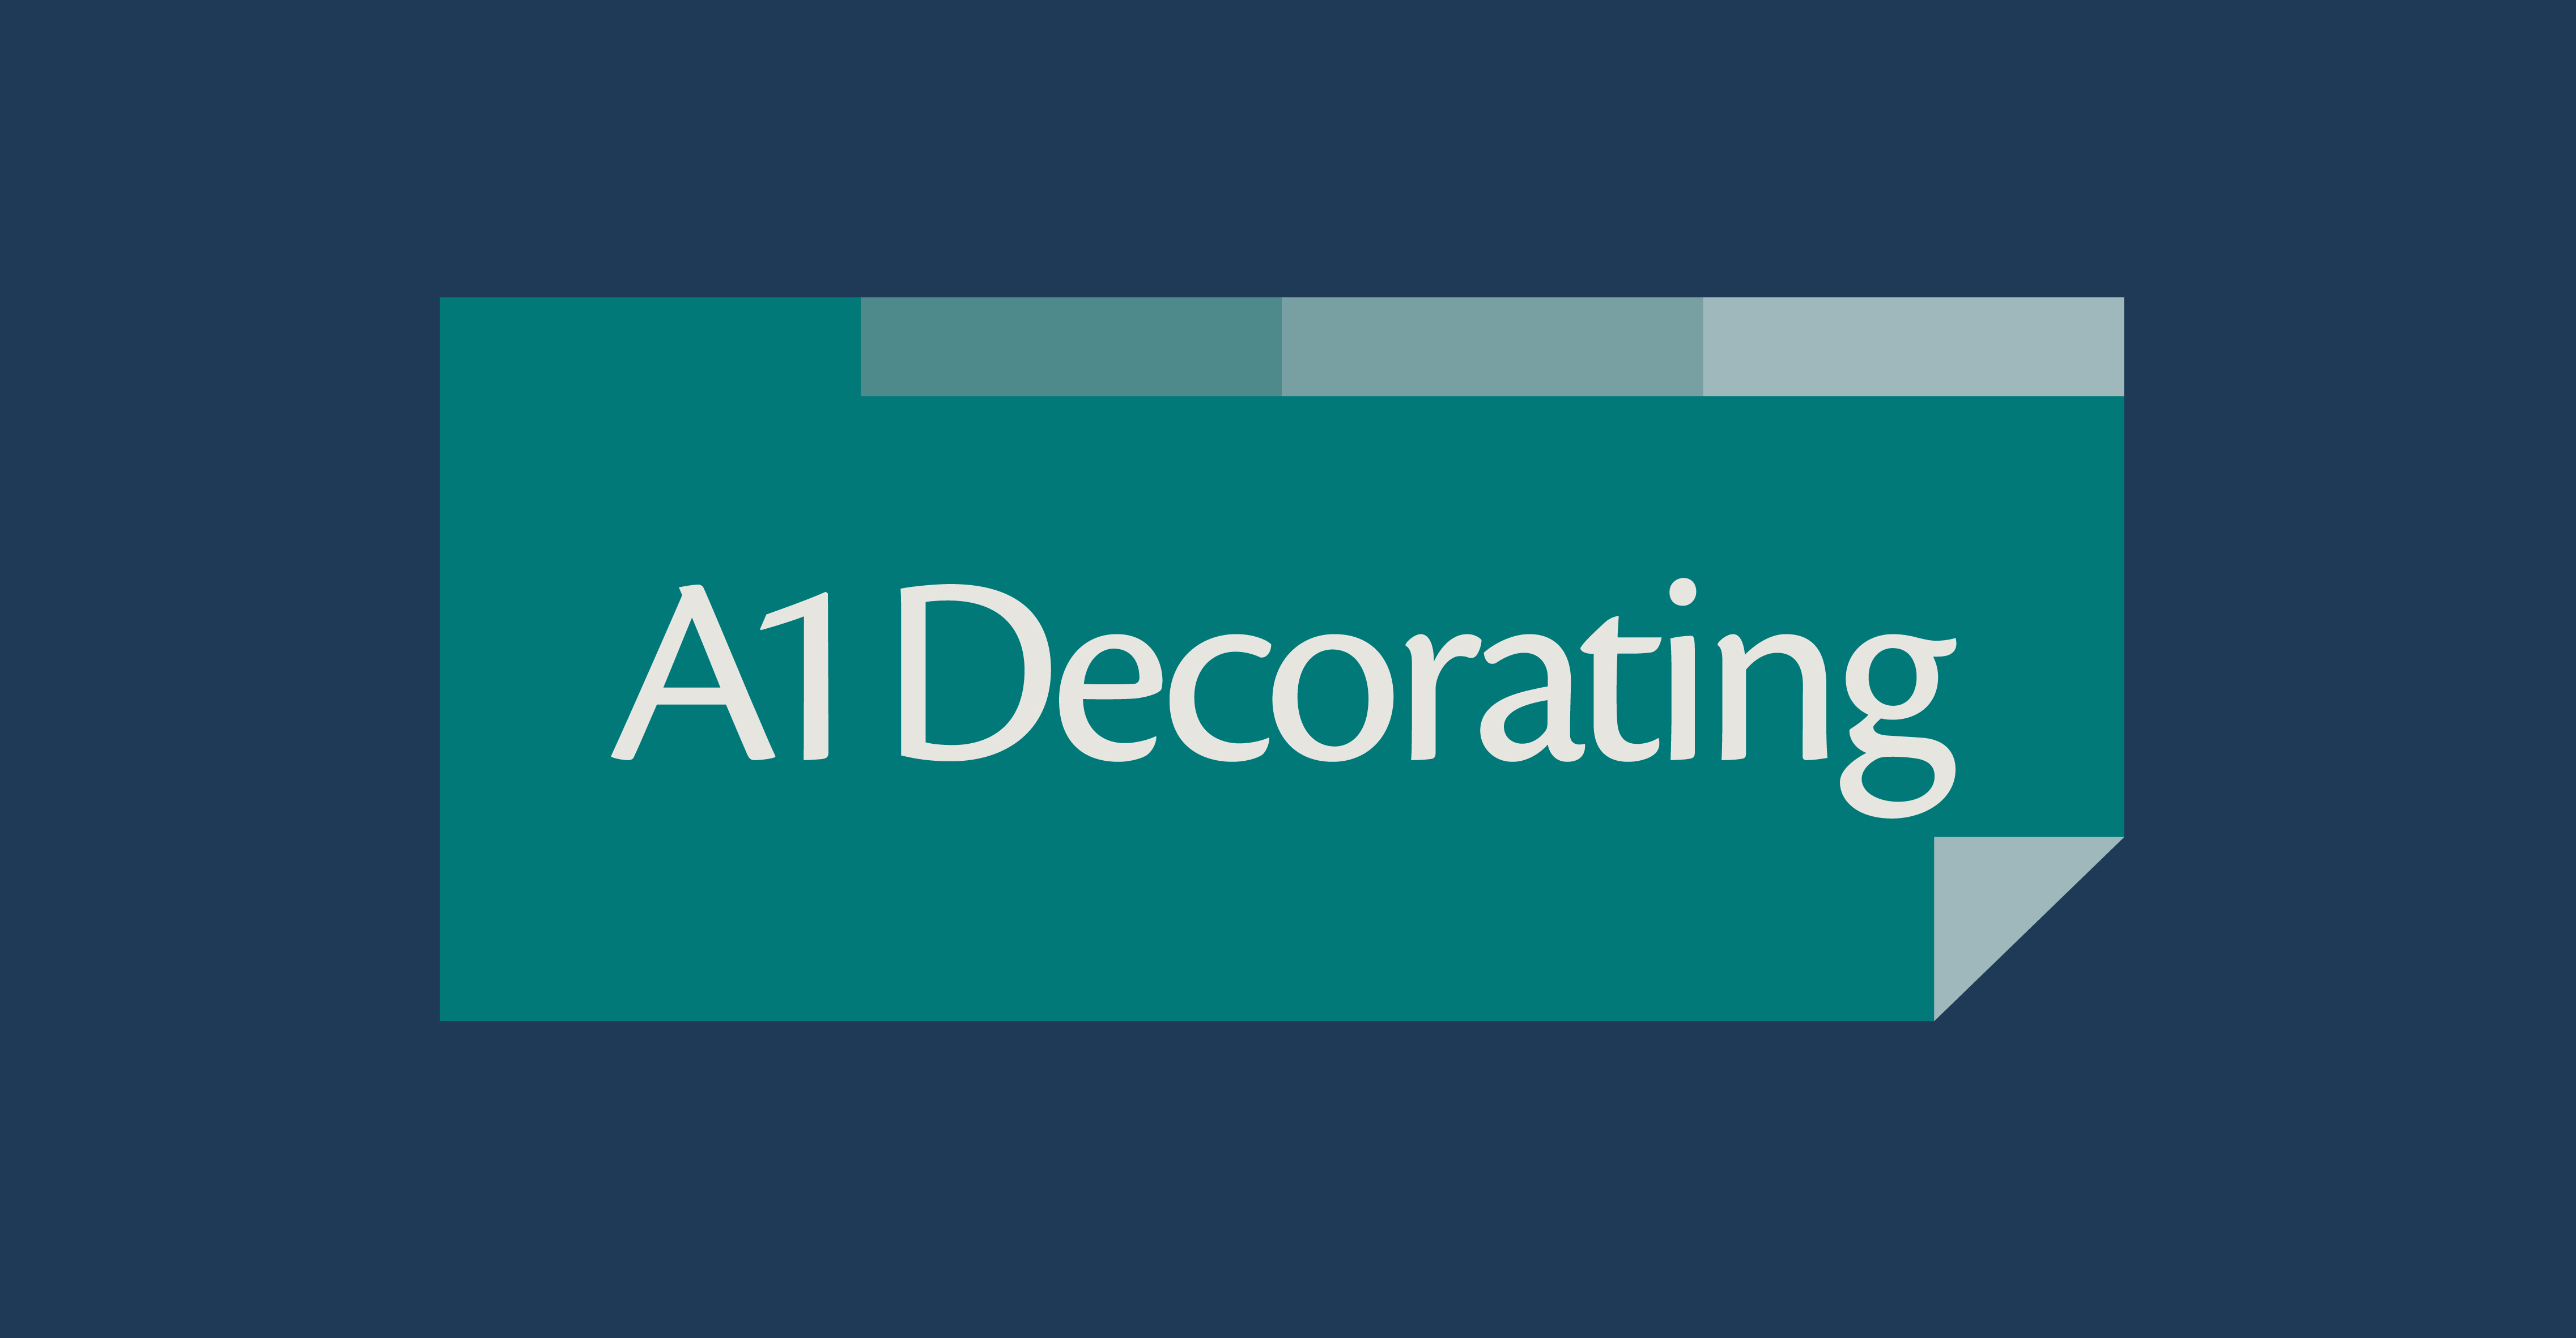 A1 Decorating Limited